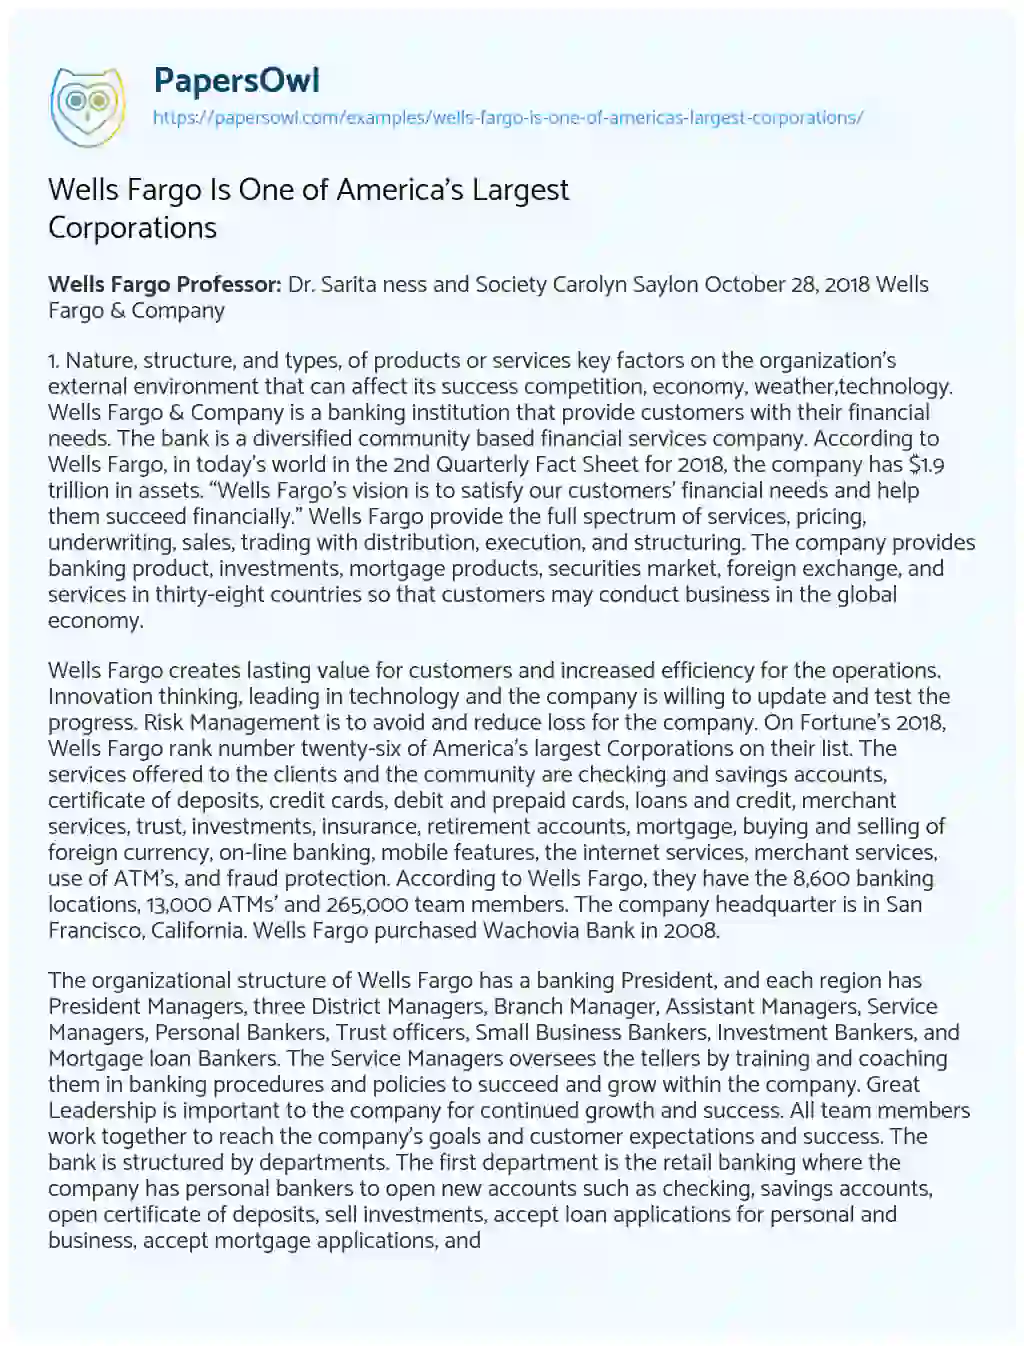 Essay on Wells Fargo is One of America’s Largest Corporations